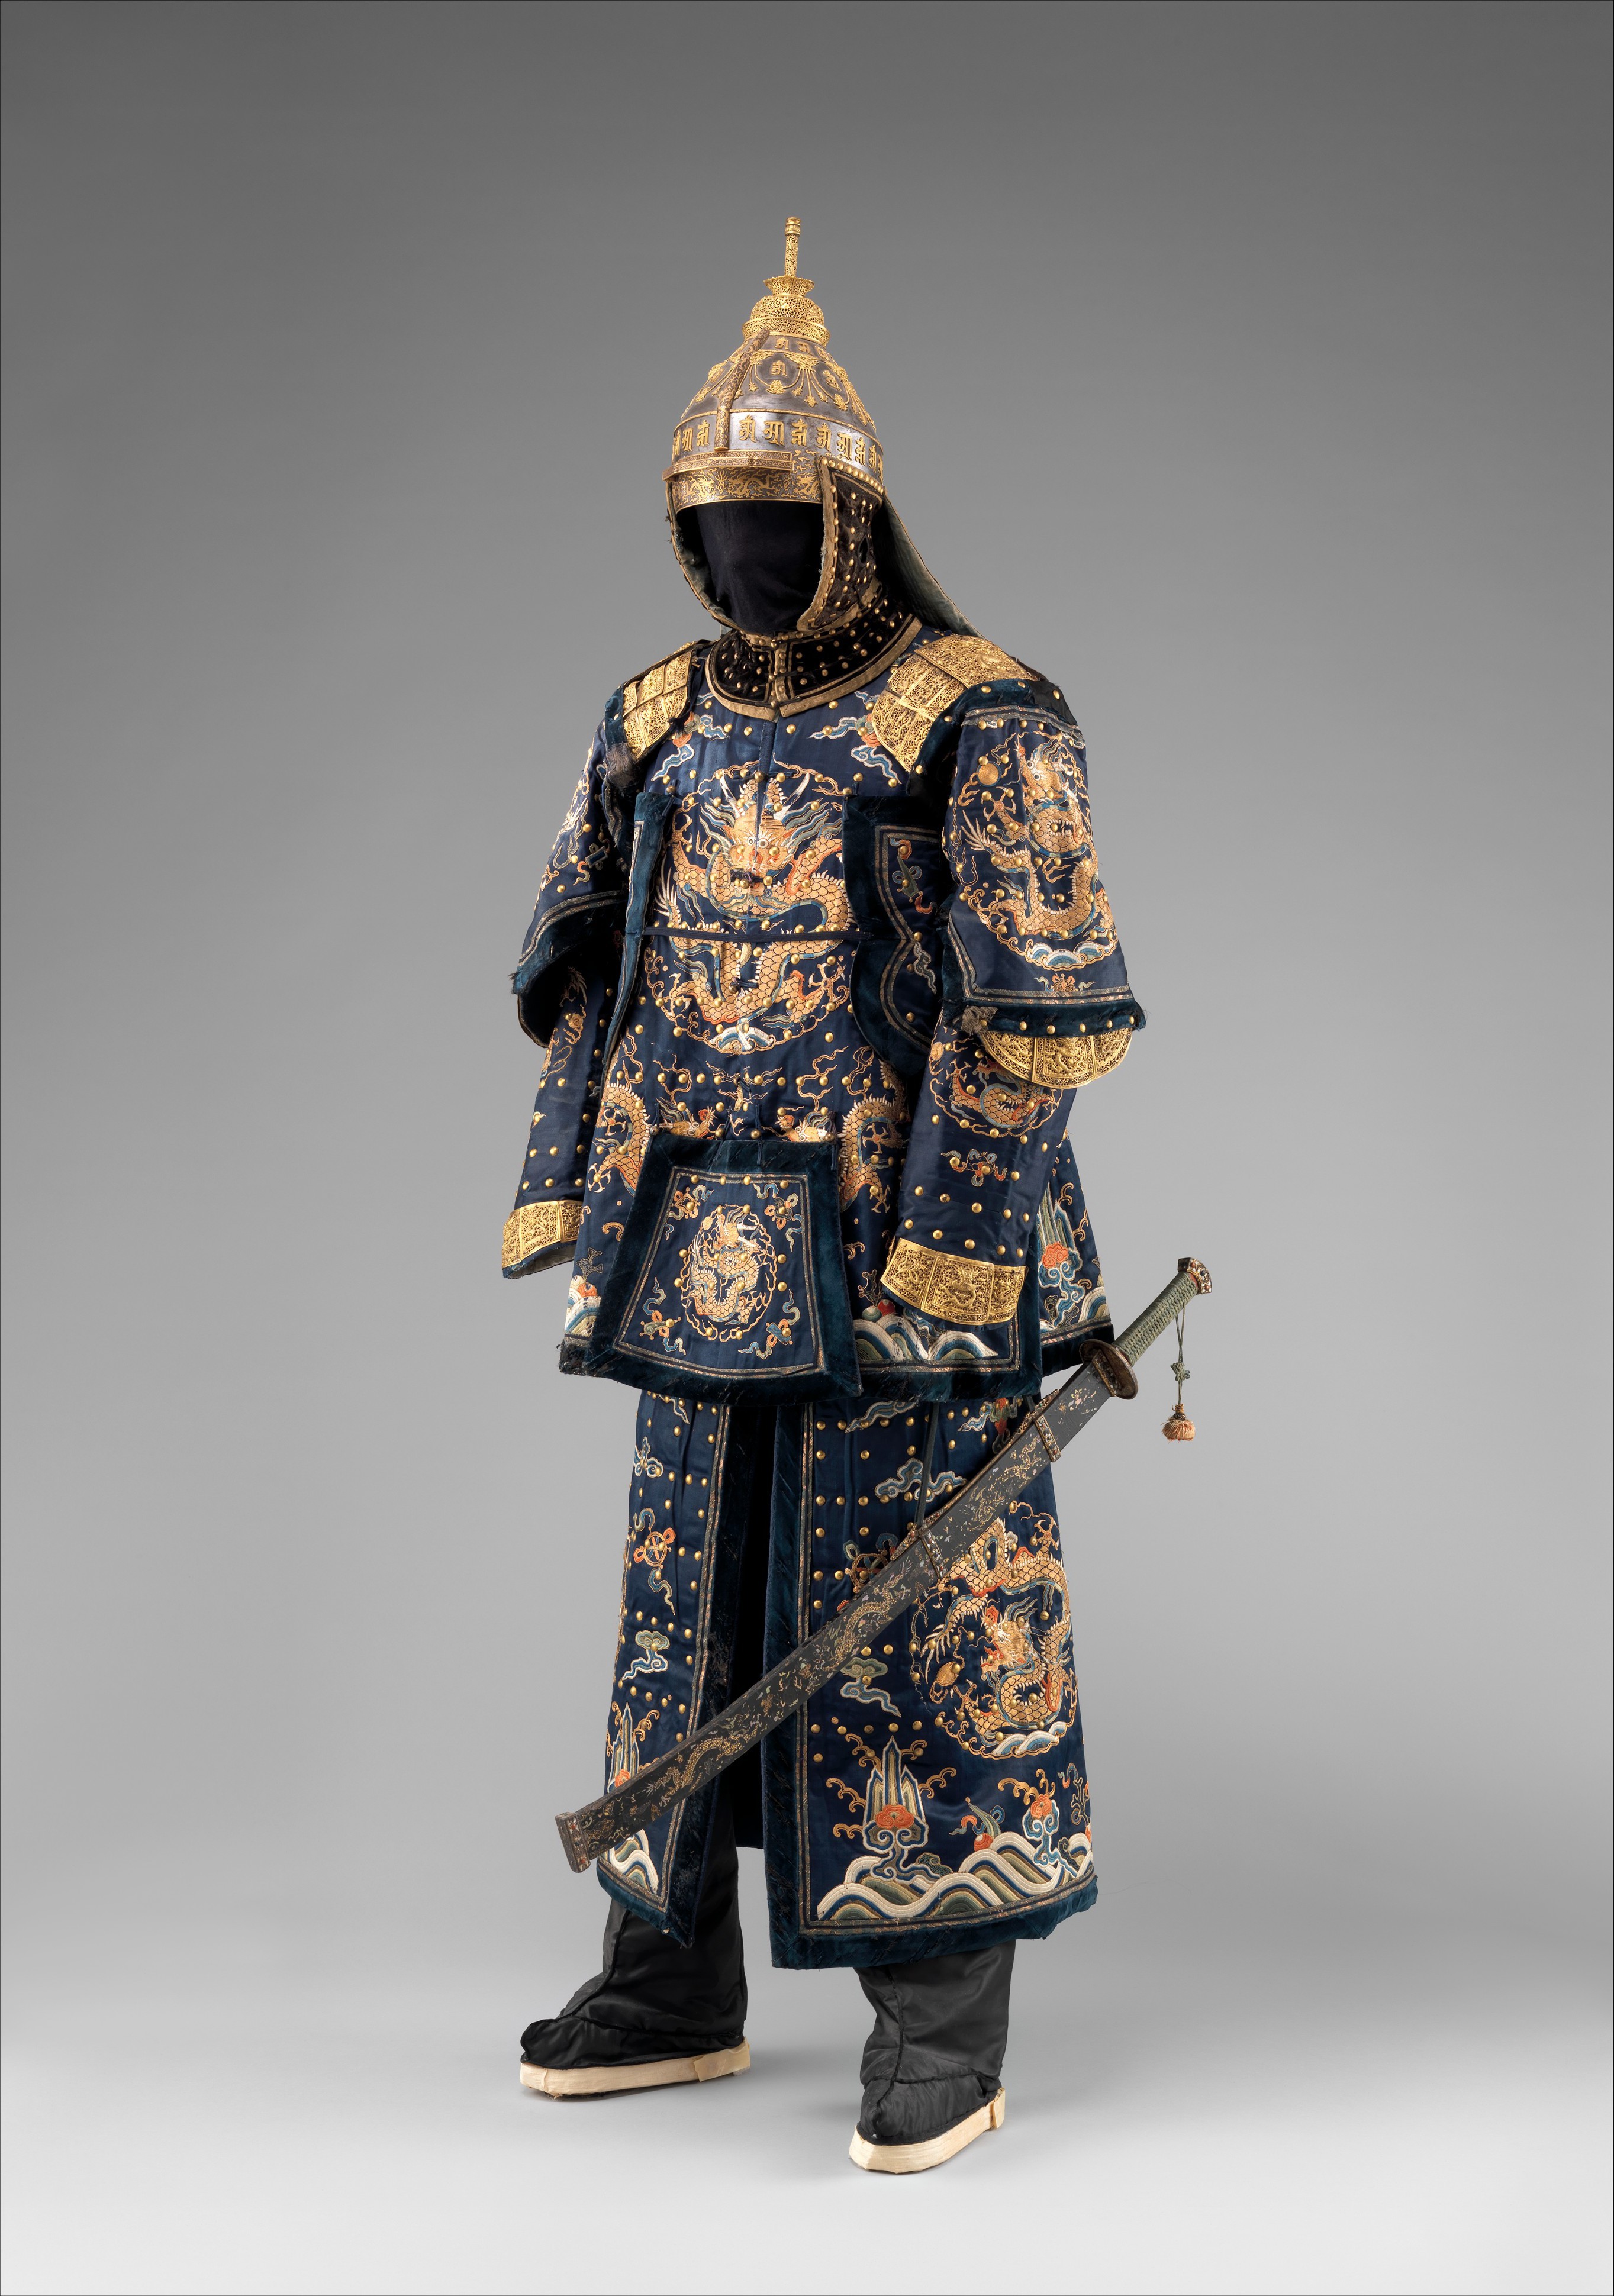 Armor of an Officer of the Imperial Palace Guard, China 18th century